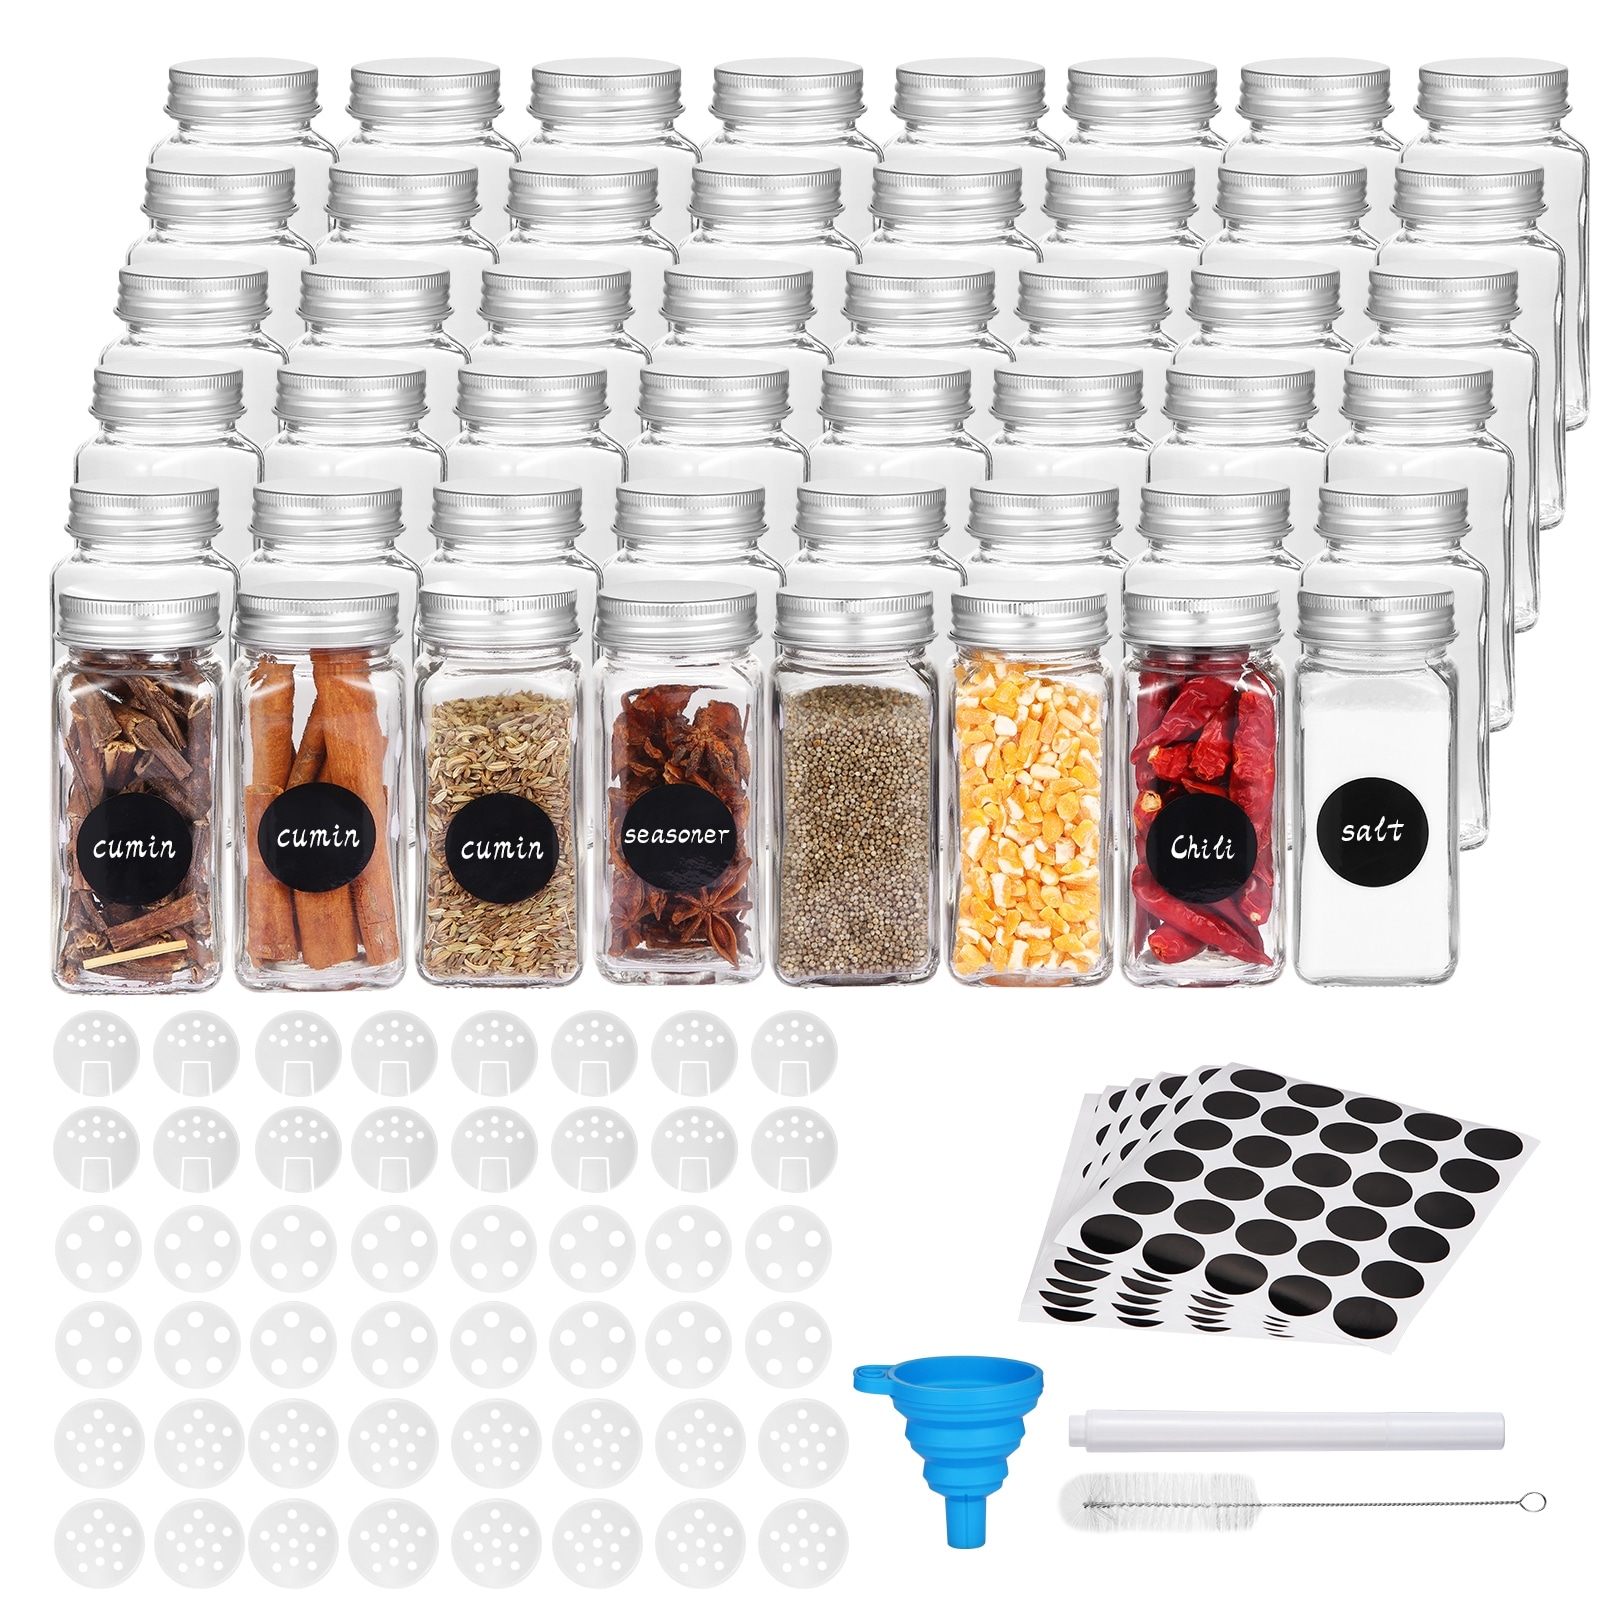 Top Seller 12 pcs 4oz 120ml Square Airtight Screw Wooden Caps Spice Glass  Bottles jar Set with Shaker Lids and Labels